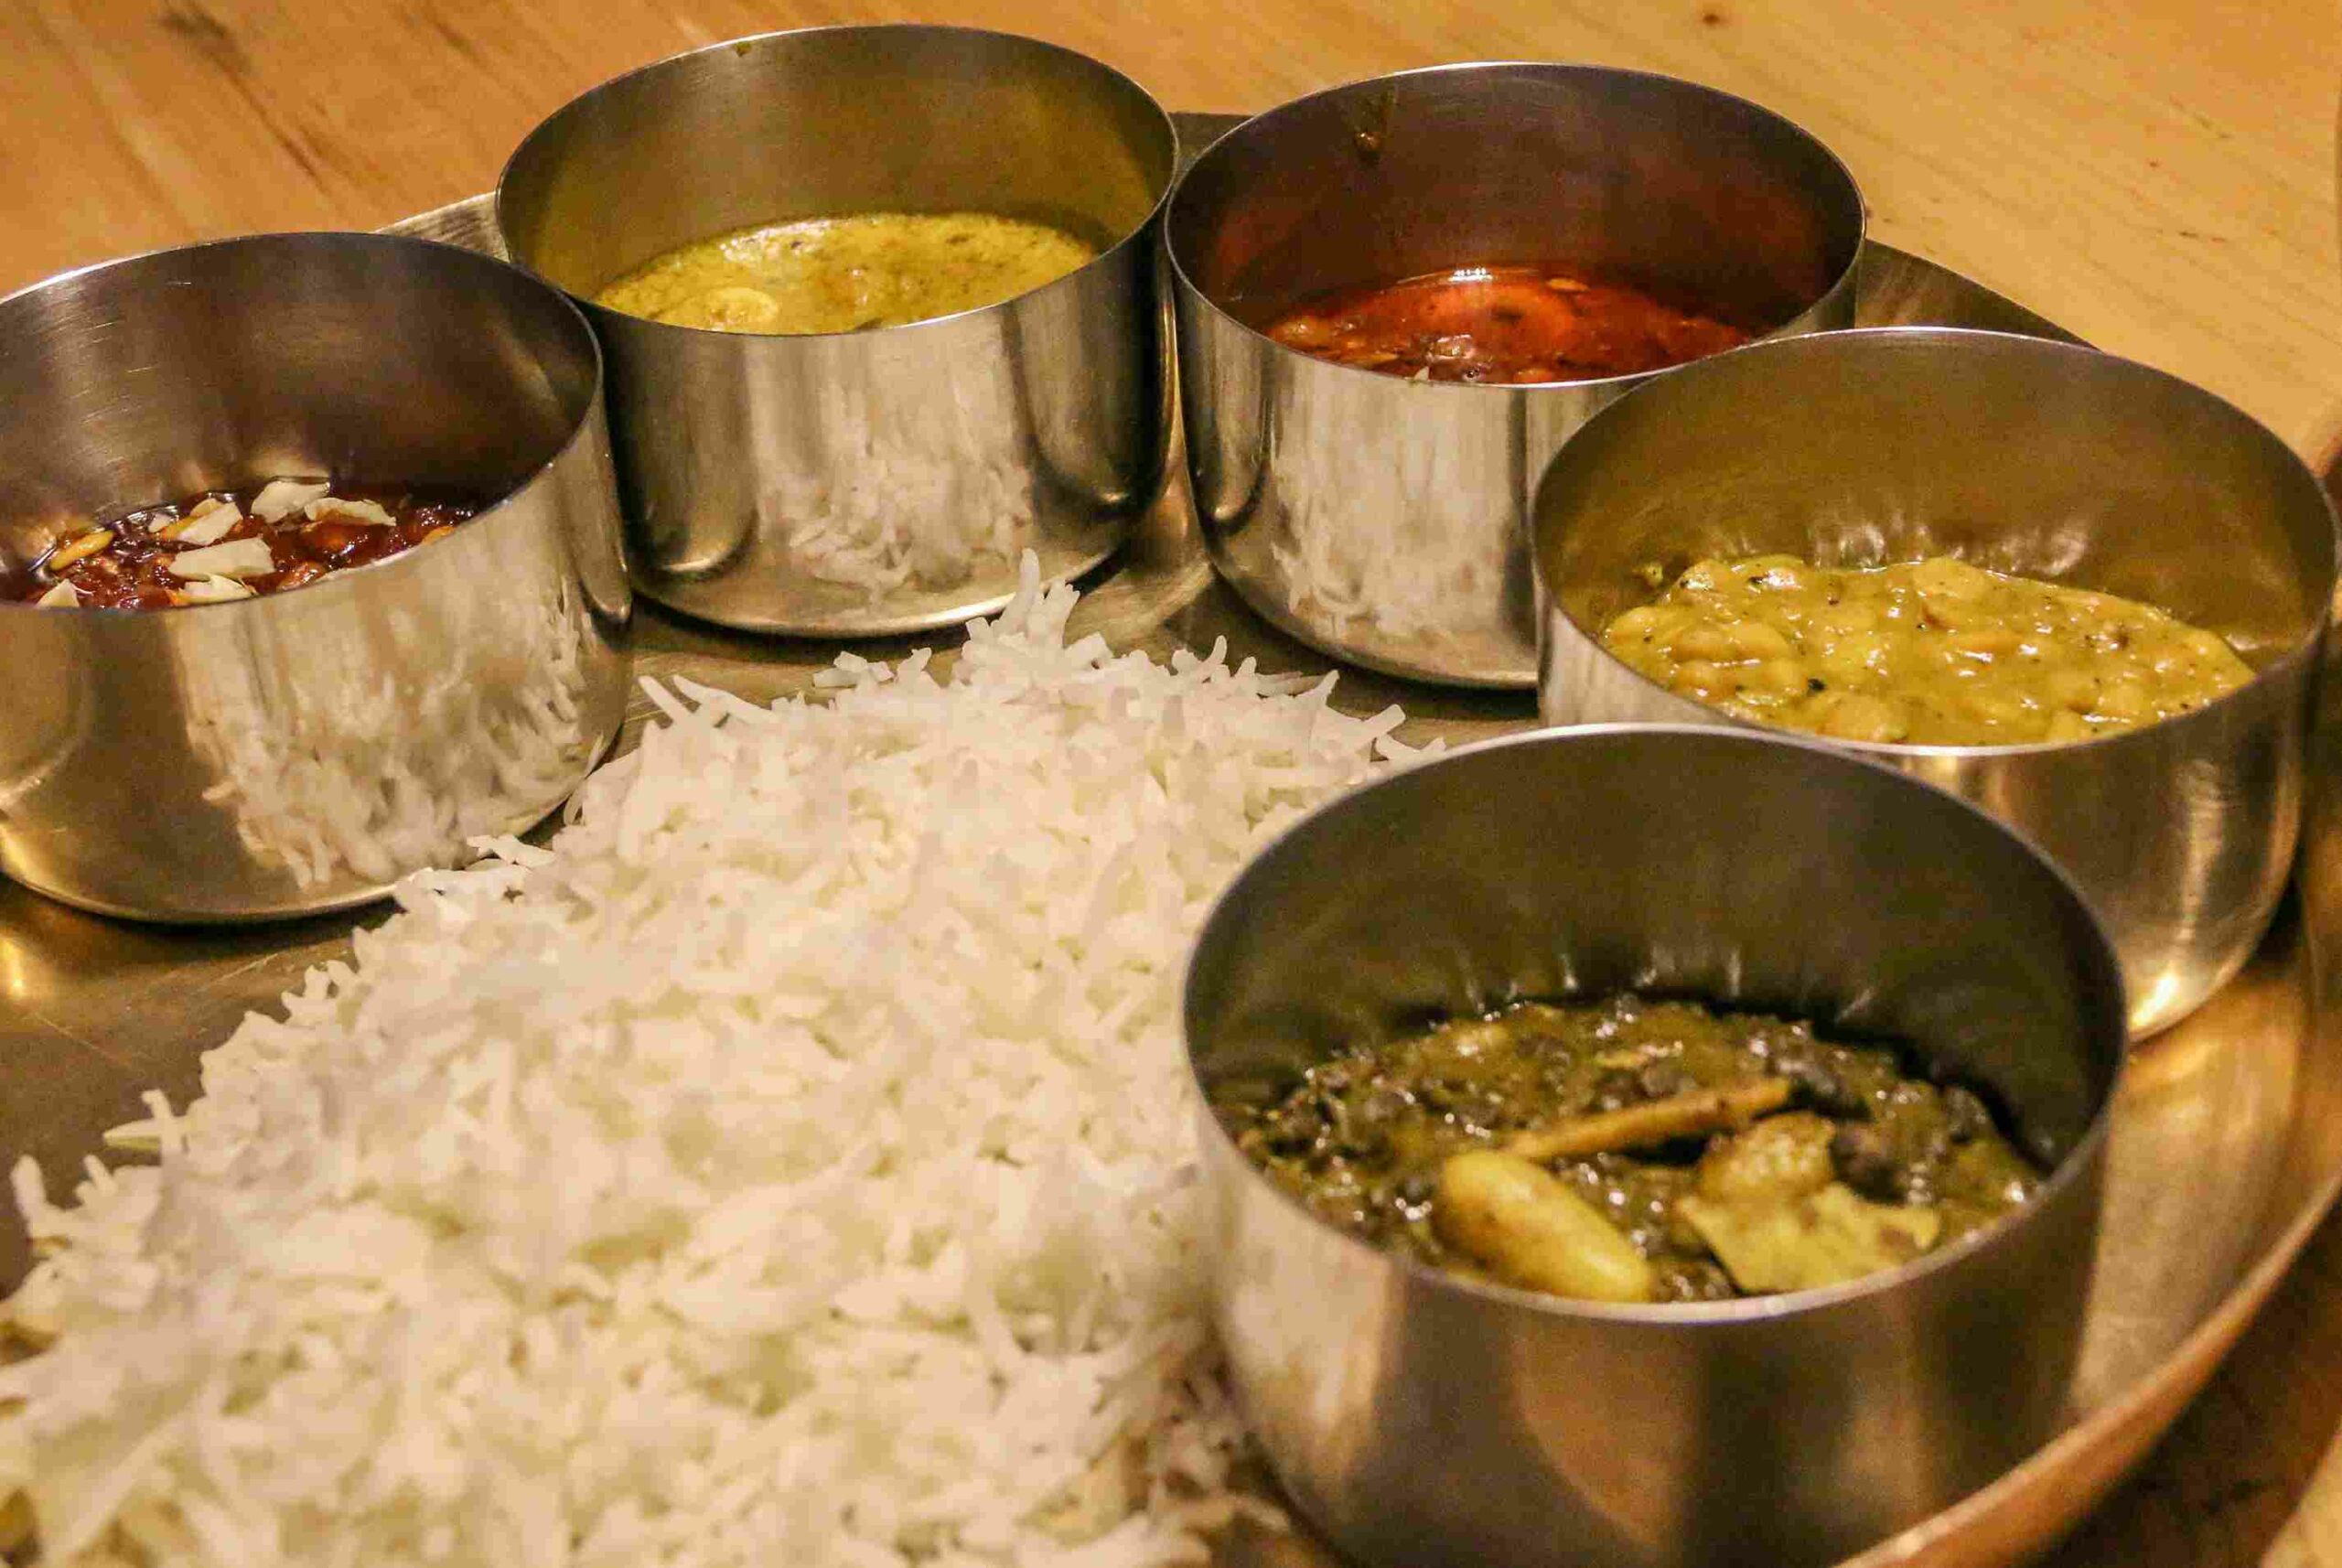 The traditional dham cooked in Himachal, made with lentils, masalas, spices